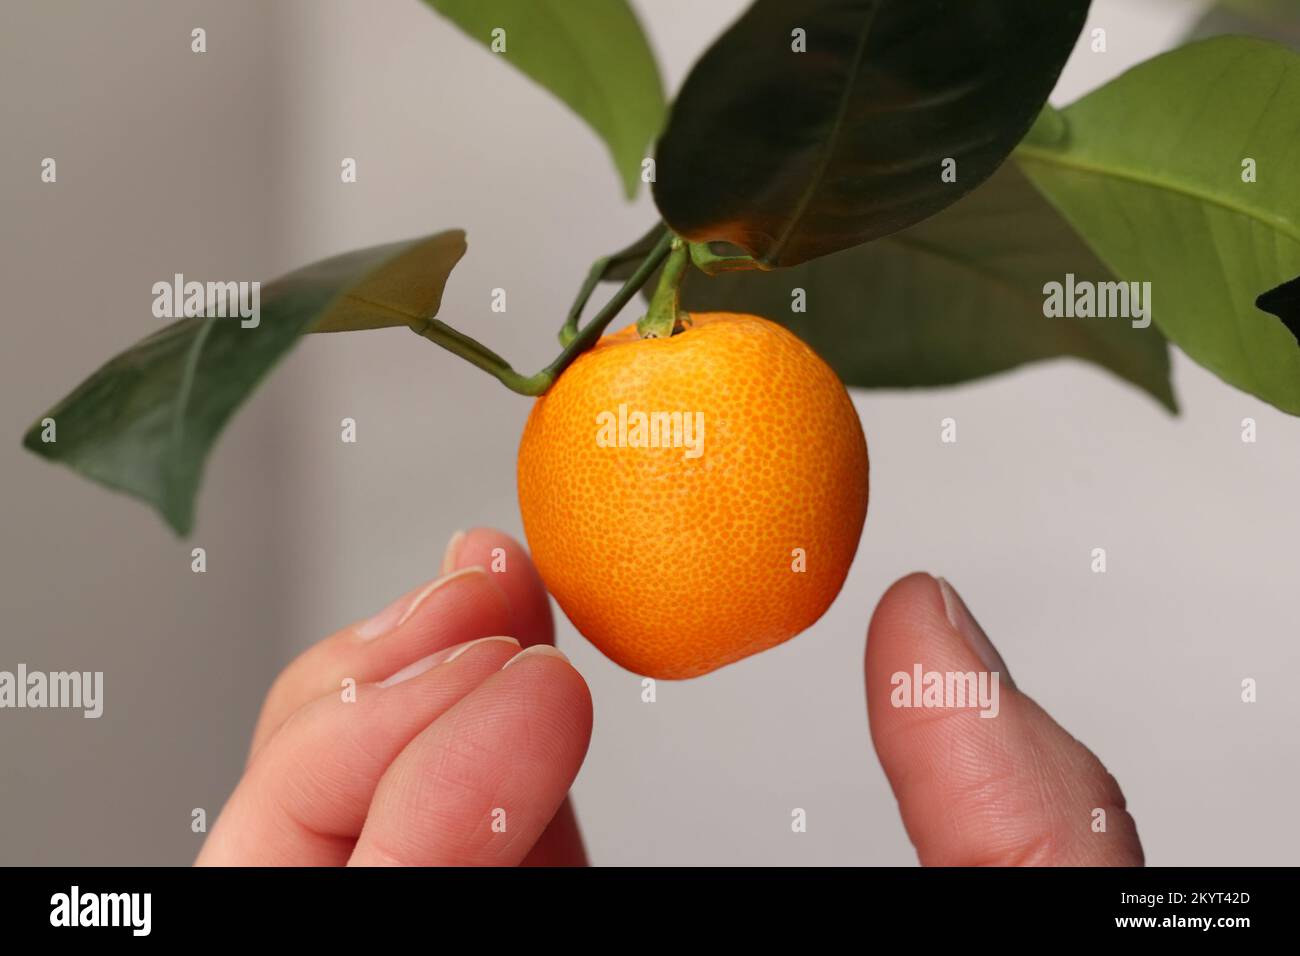 A woman's hand is about to pluck a calamondin from the calamansi tree growing at home. The small, round, orange citrus fruit, also known as Calamansi, Stock Photo